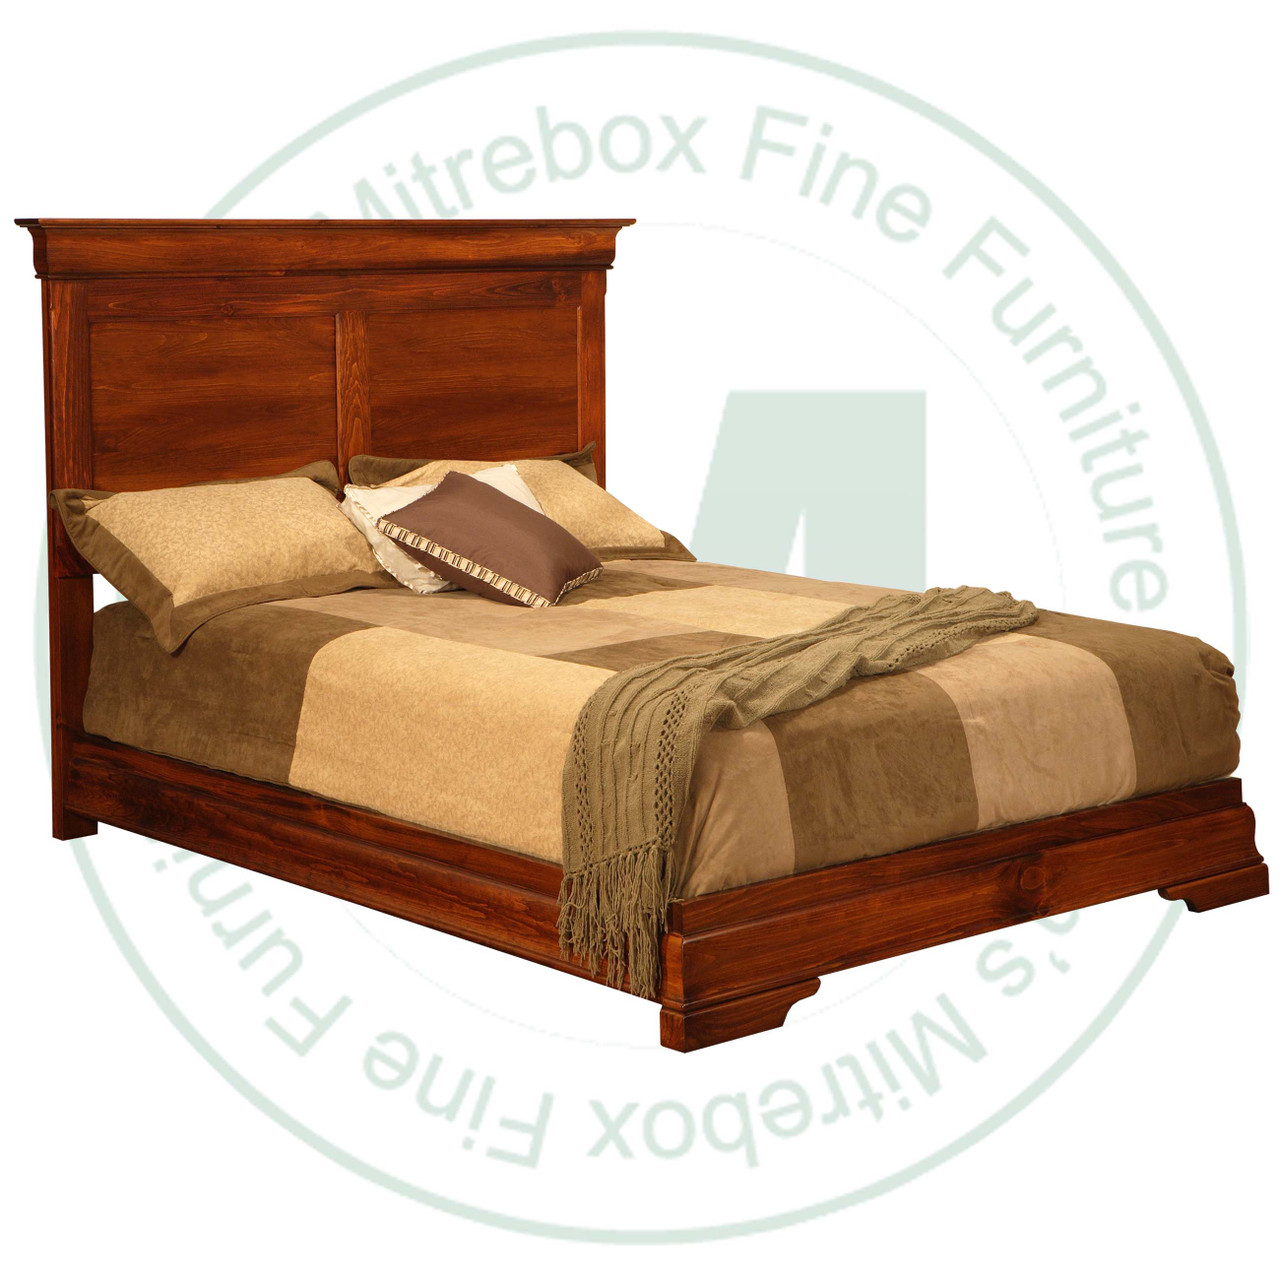 Maple Phillipe King With Wrap Around Footboard